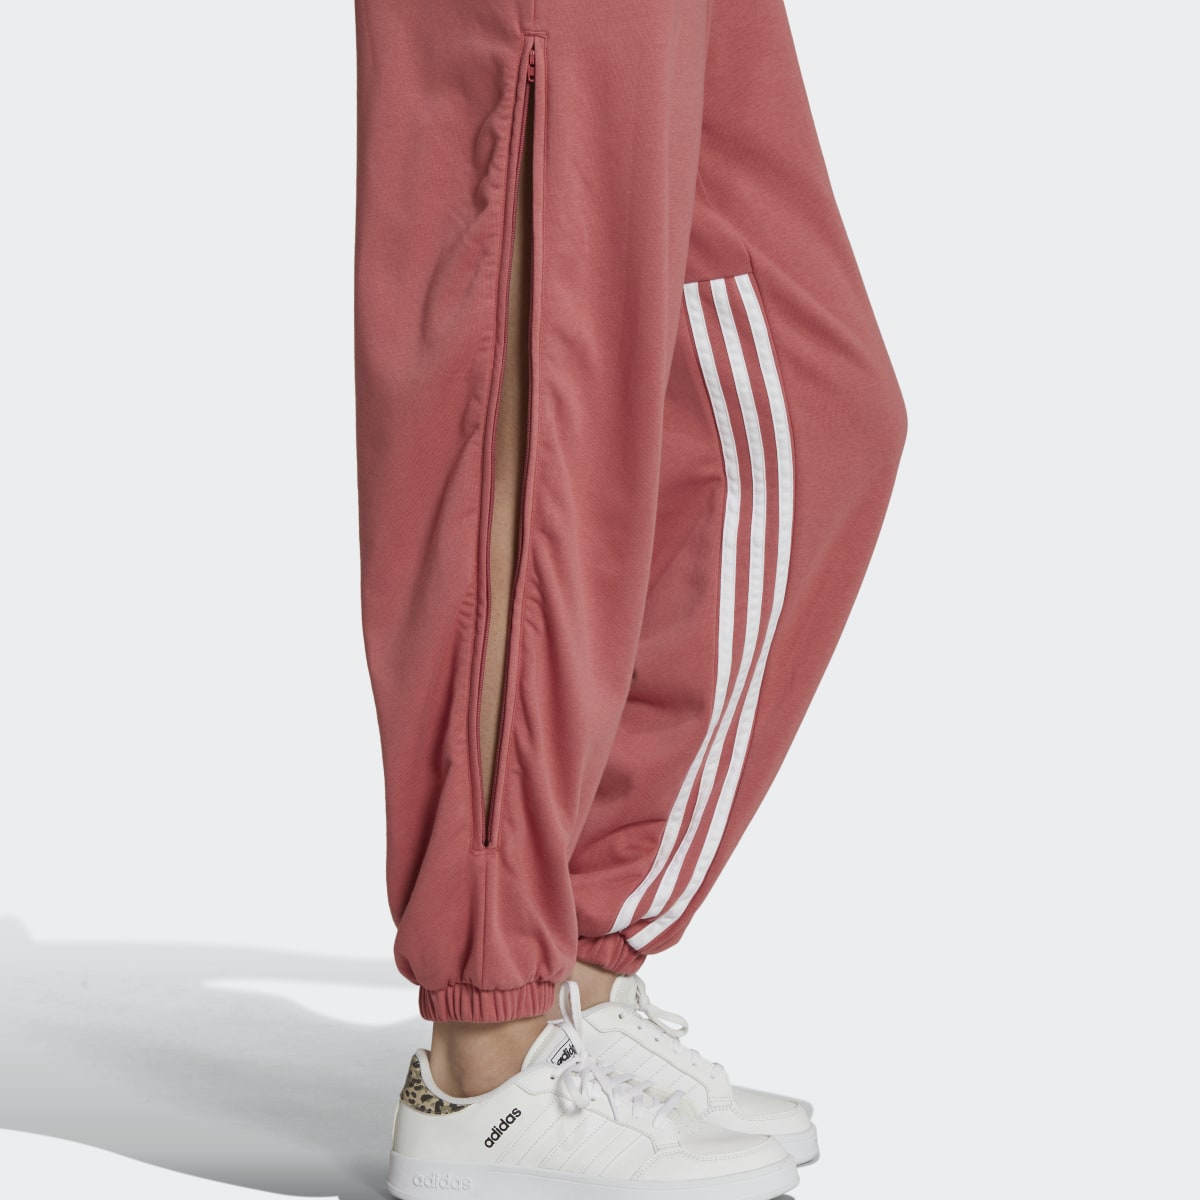 Adidas Hyperglam 3-Stripes Oversized Cuffed Joggers with Side Zippers. 6